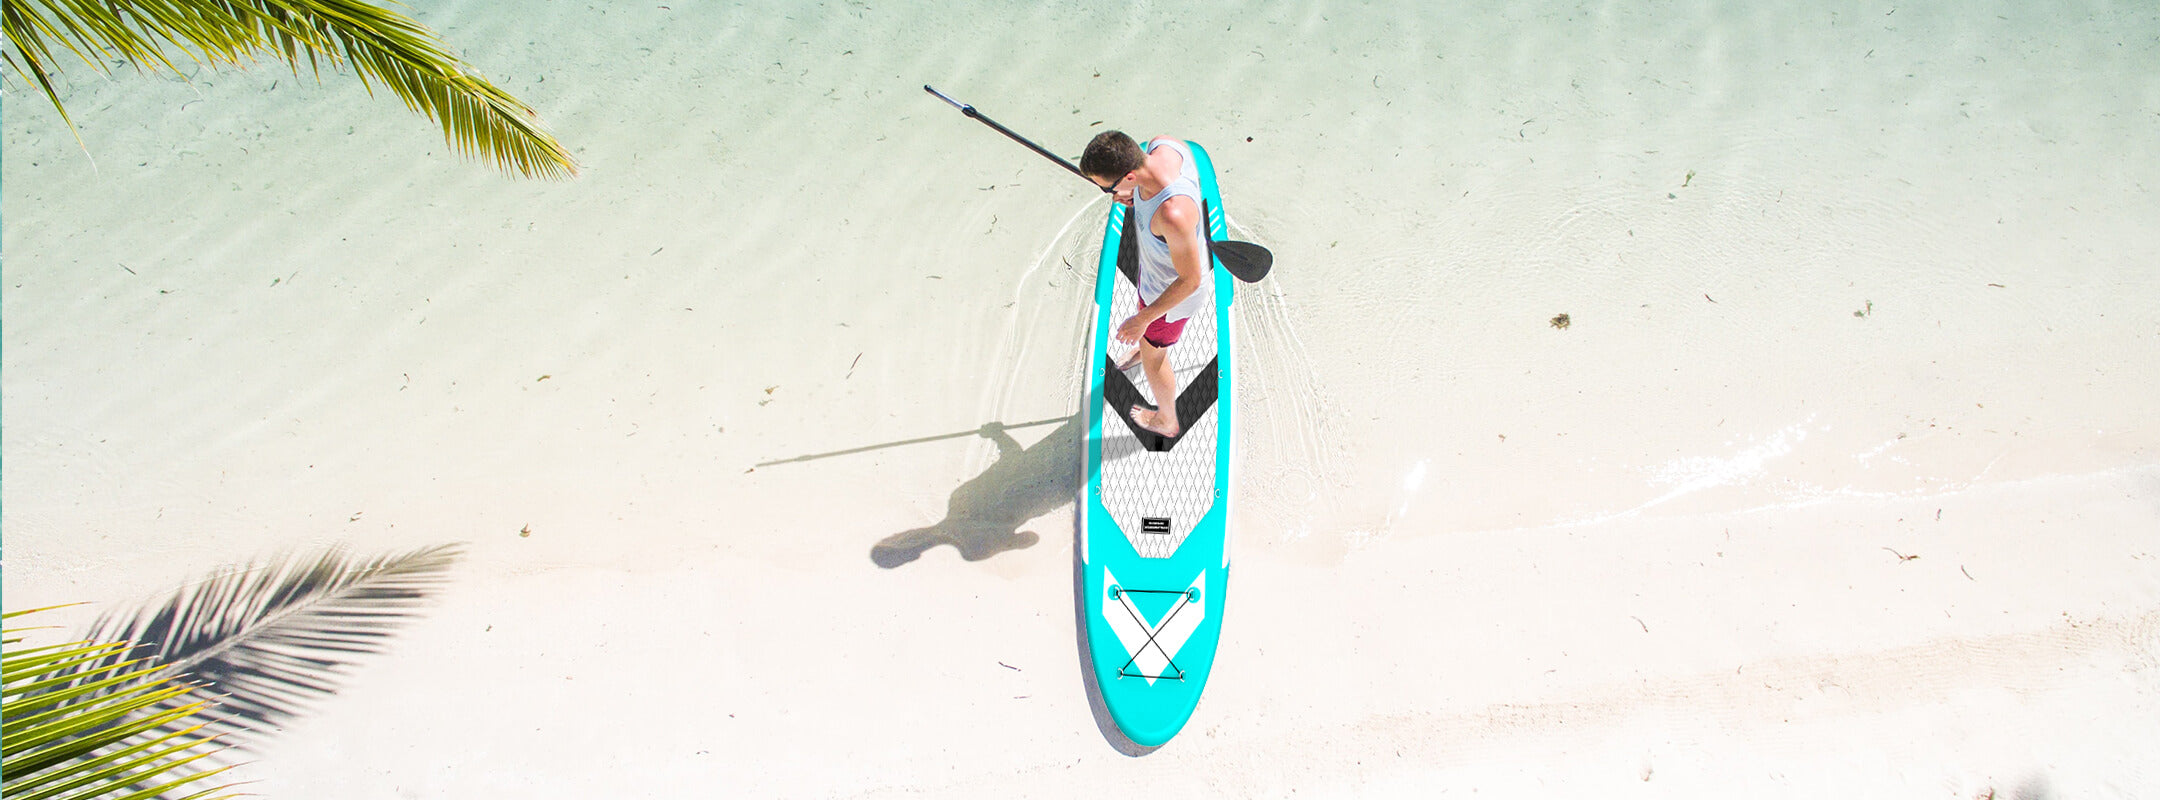 HOW TO USE STAND UP PADDLE BOARD